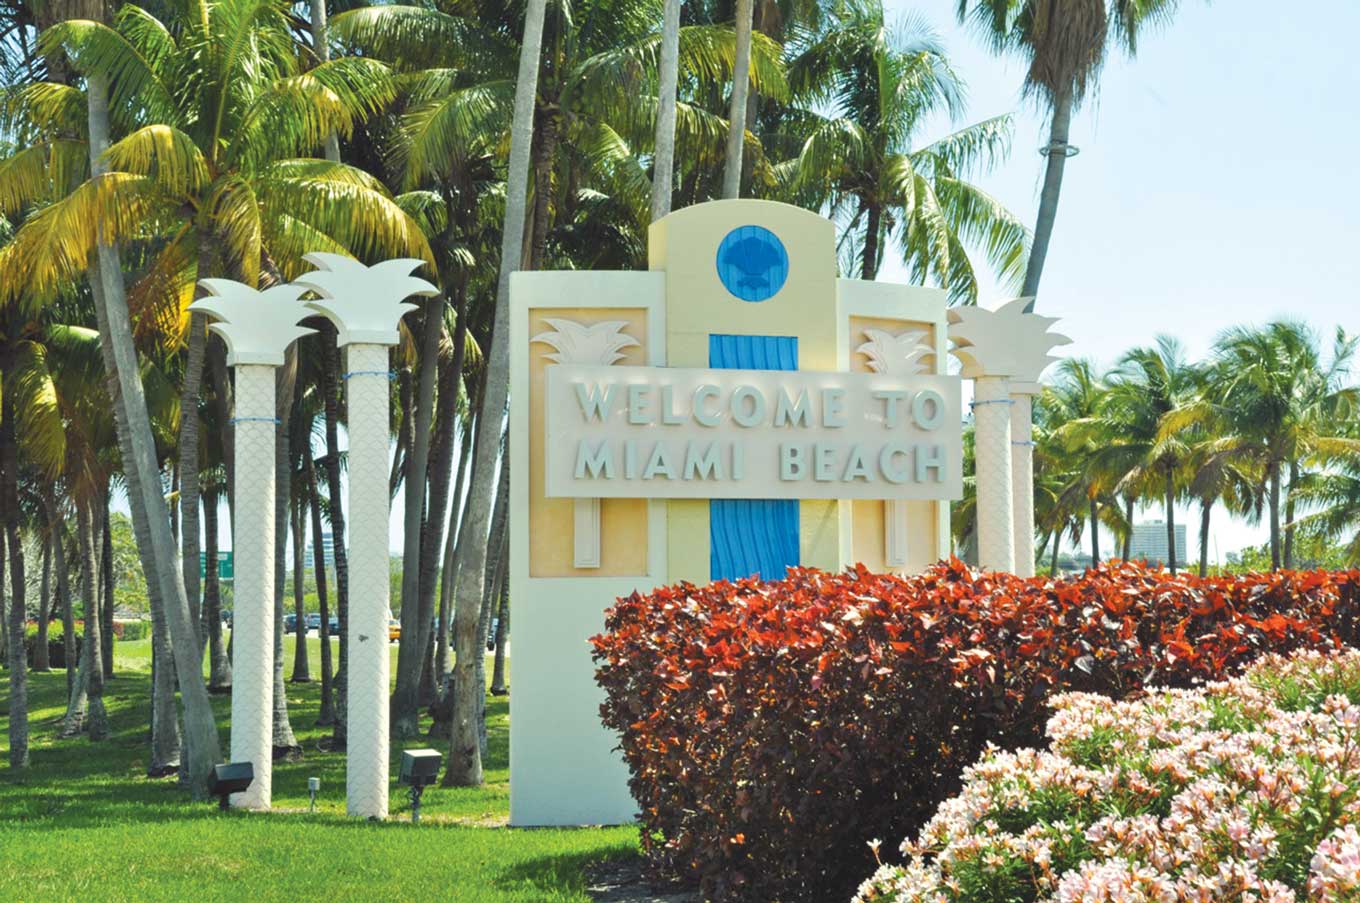 Iconic Miami Beach welcome sign may become LED display